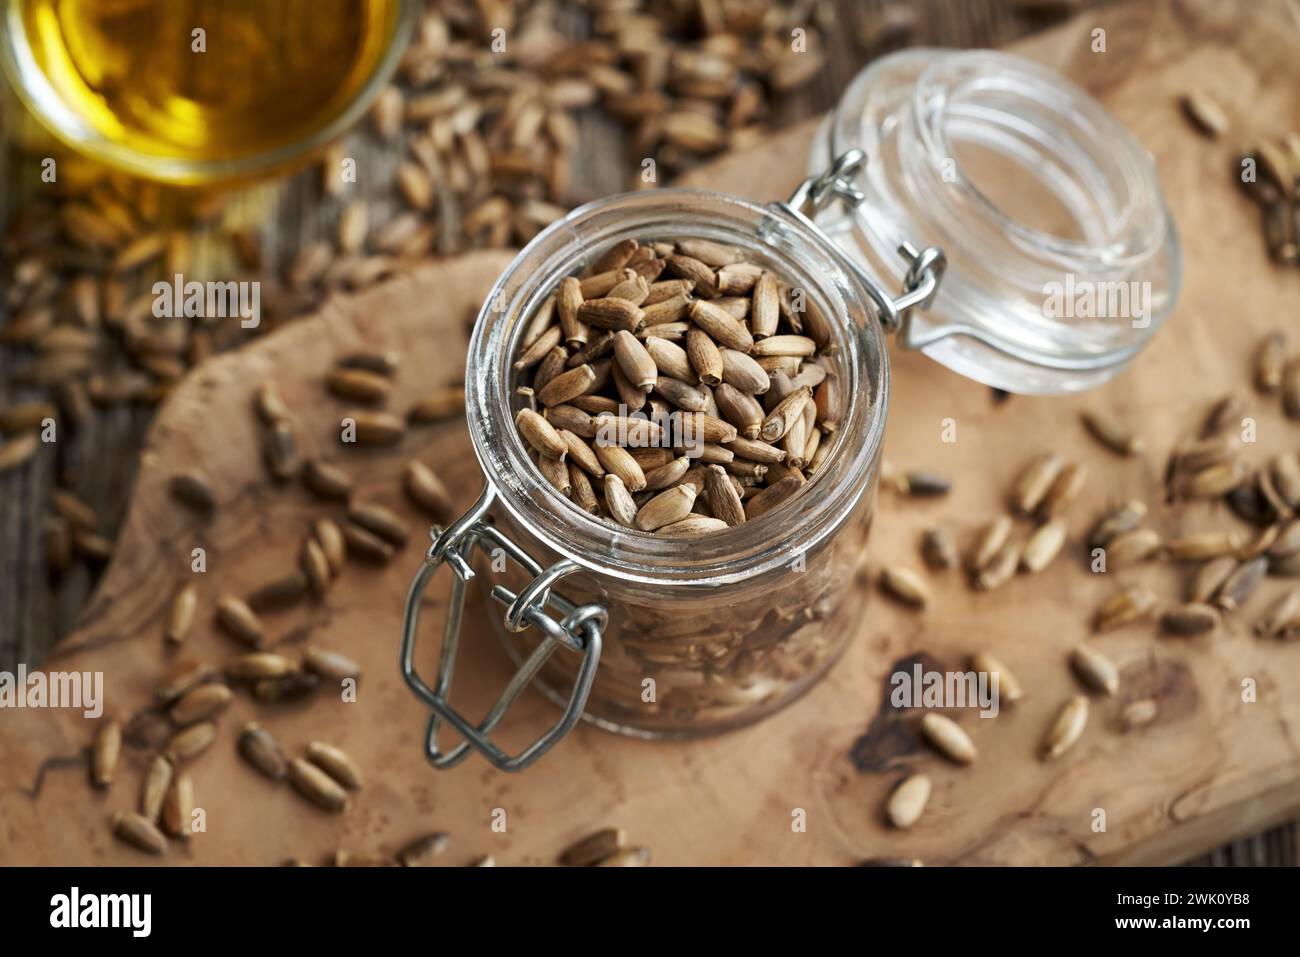 Milk thistle seeds in a glass jar, with Carduus marianus oil in the background Stock Photo